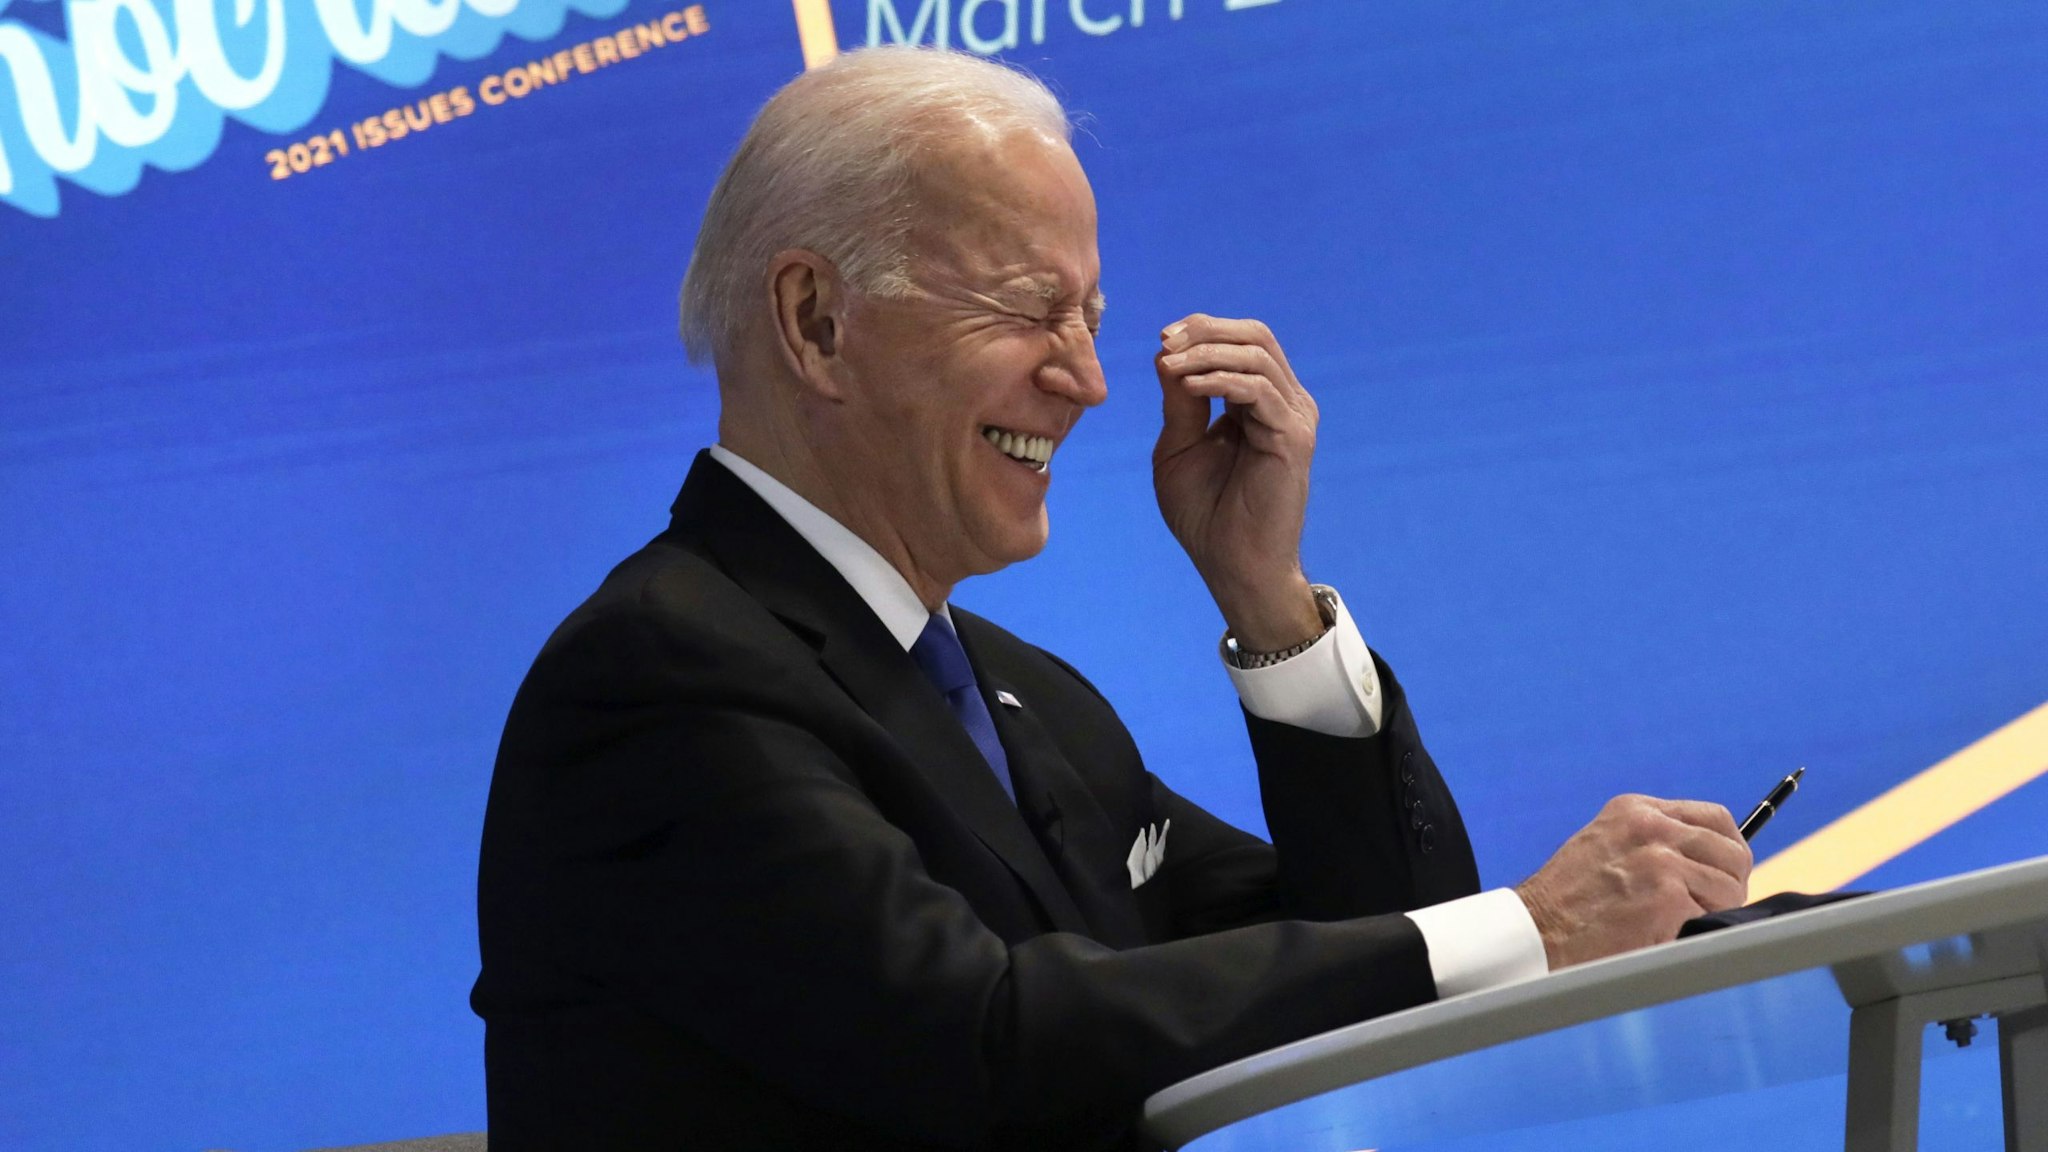 U.S. President Joe Biden laughs during a virtual meeting with the House Democratic Caucus in the Eisenhower Executive Office Building in Washington, D.C., U.S., on Wednesday, March 3, 2021. Biden has agreed to moderate Democrats' demands to narrow eligibility for stimulus checks, but rejected a push to trim extra unemployment benefits, as he tries to win support for his $1.9 trillion pandemic-relief bill, according to a Democratic aide.